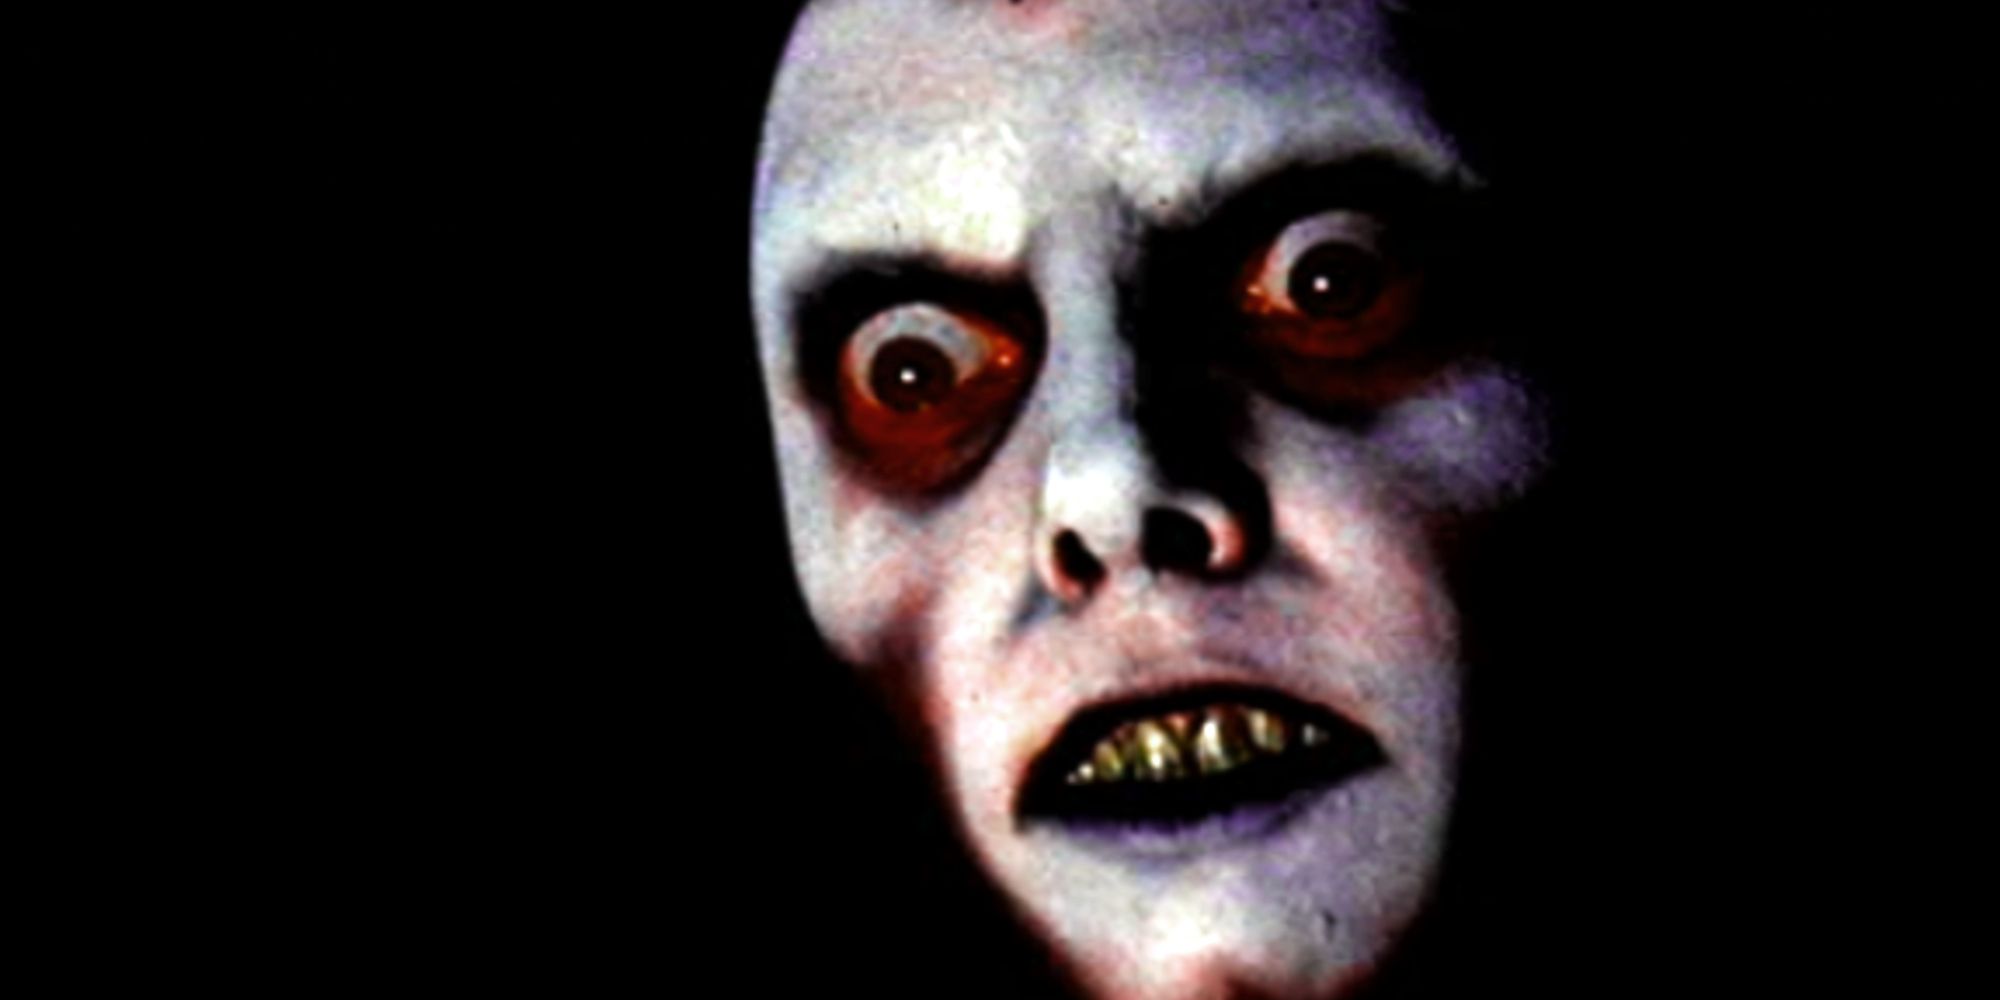 Pazuzu surrounded by darkness in The Exorcist.